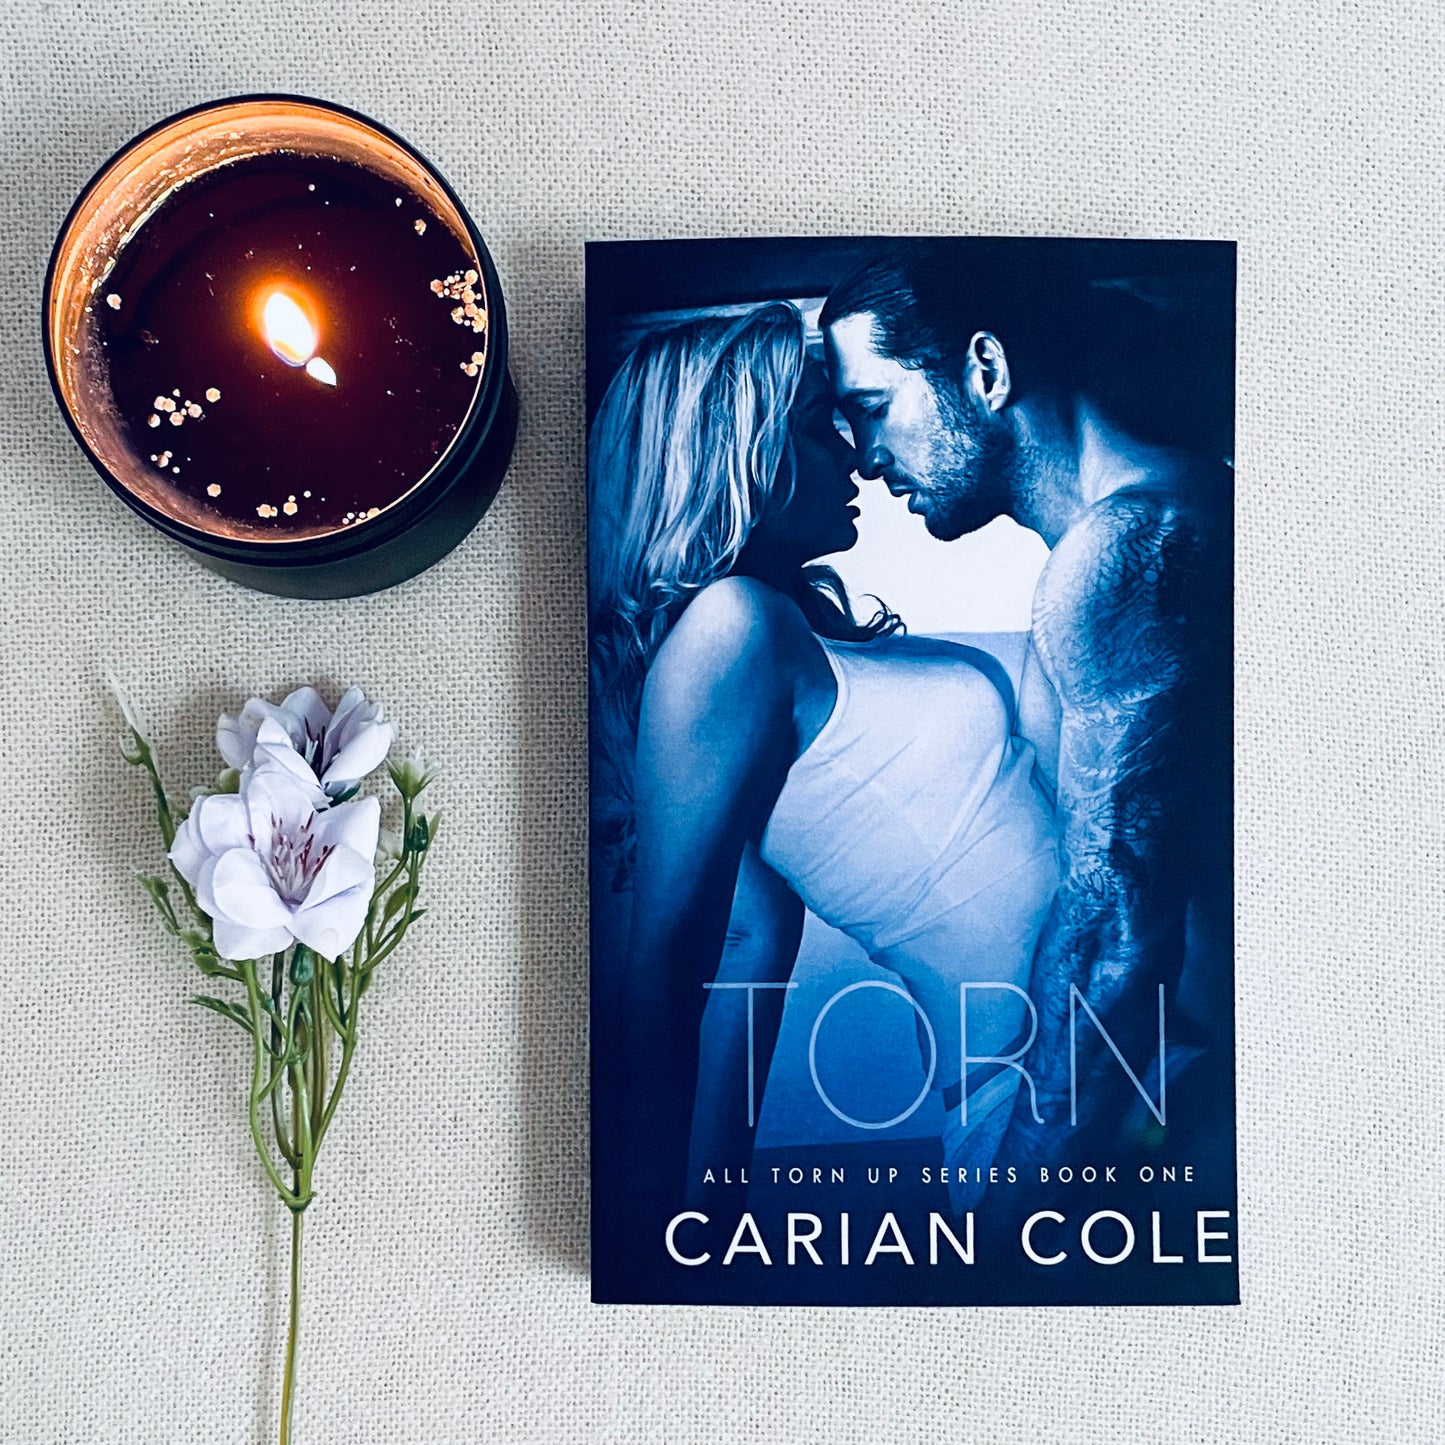 All Torn Up series by Carian Cole